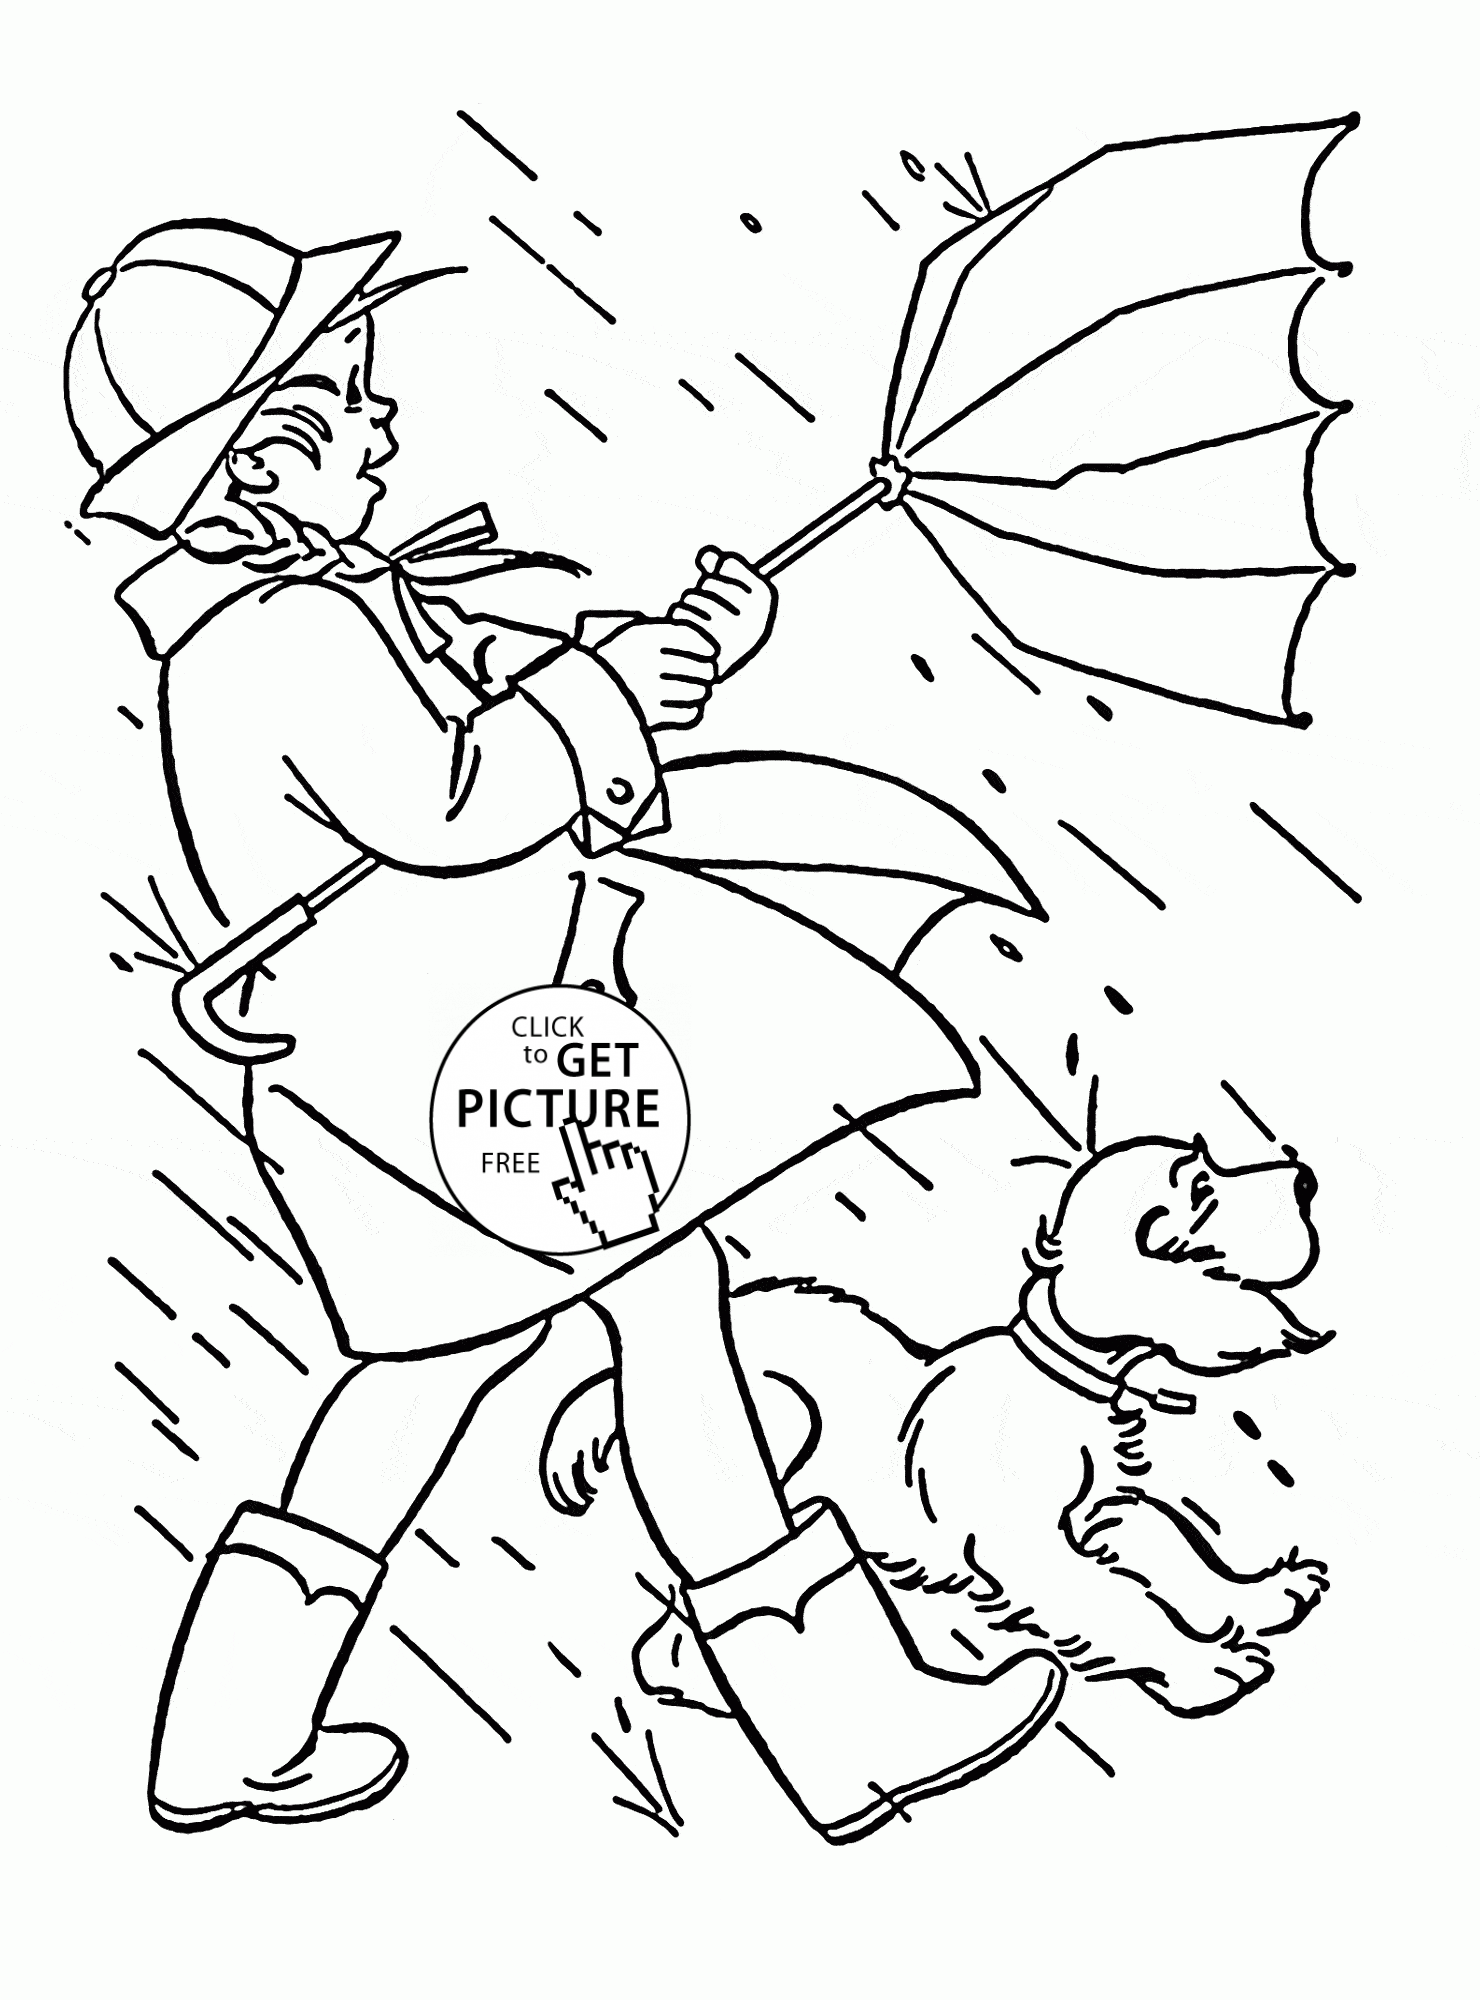 Windy and Rainy Spring coloring page for kids, seasons coloring ...